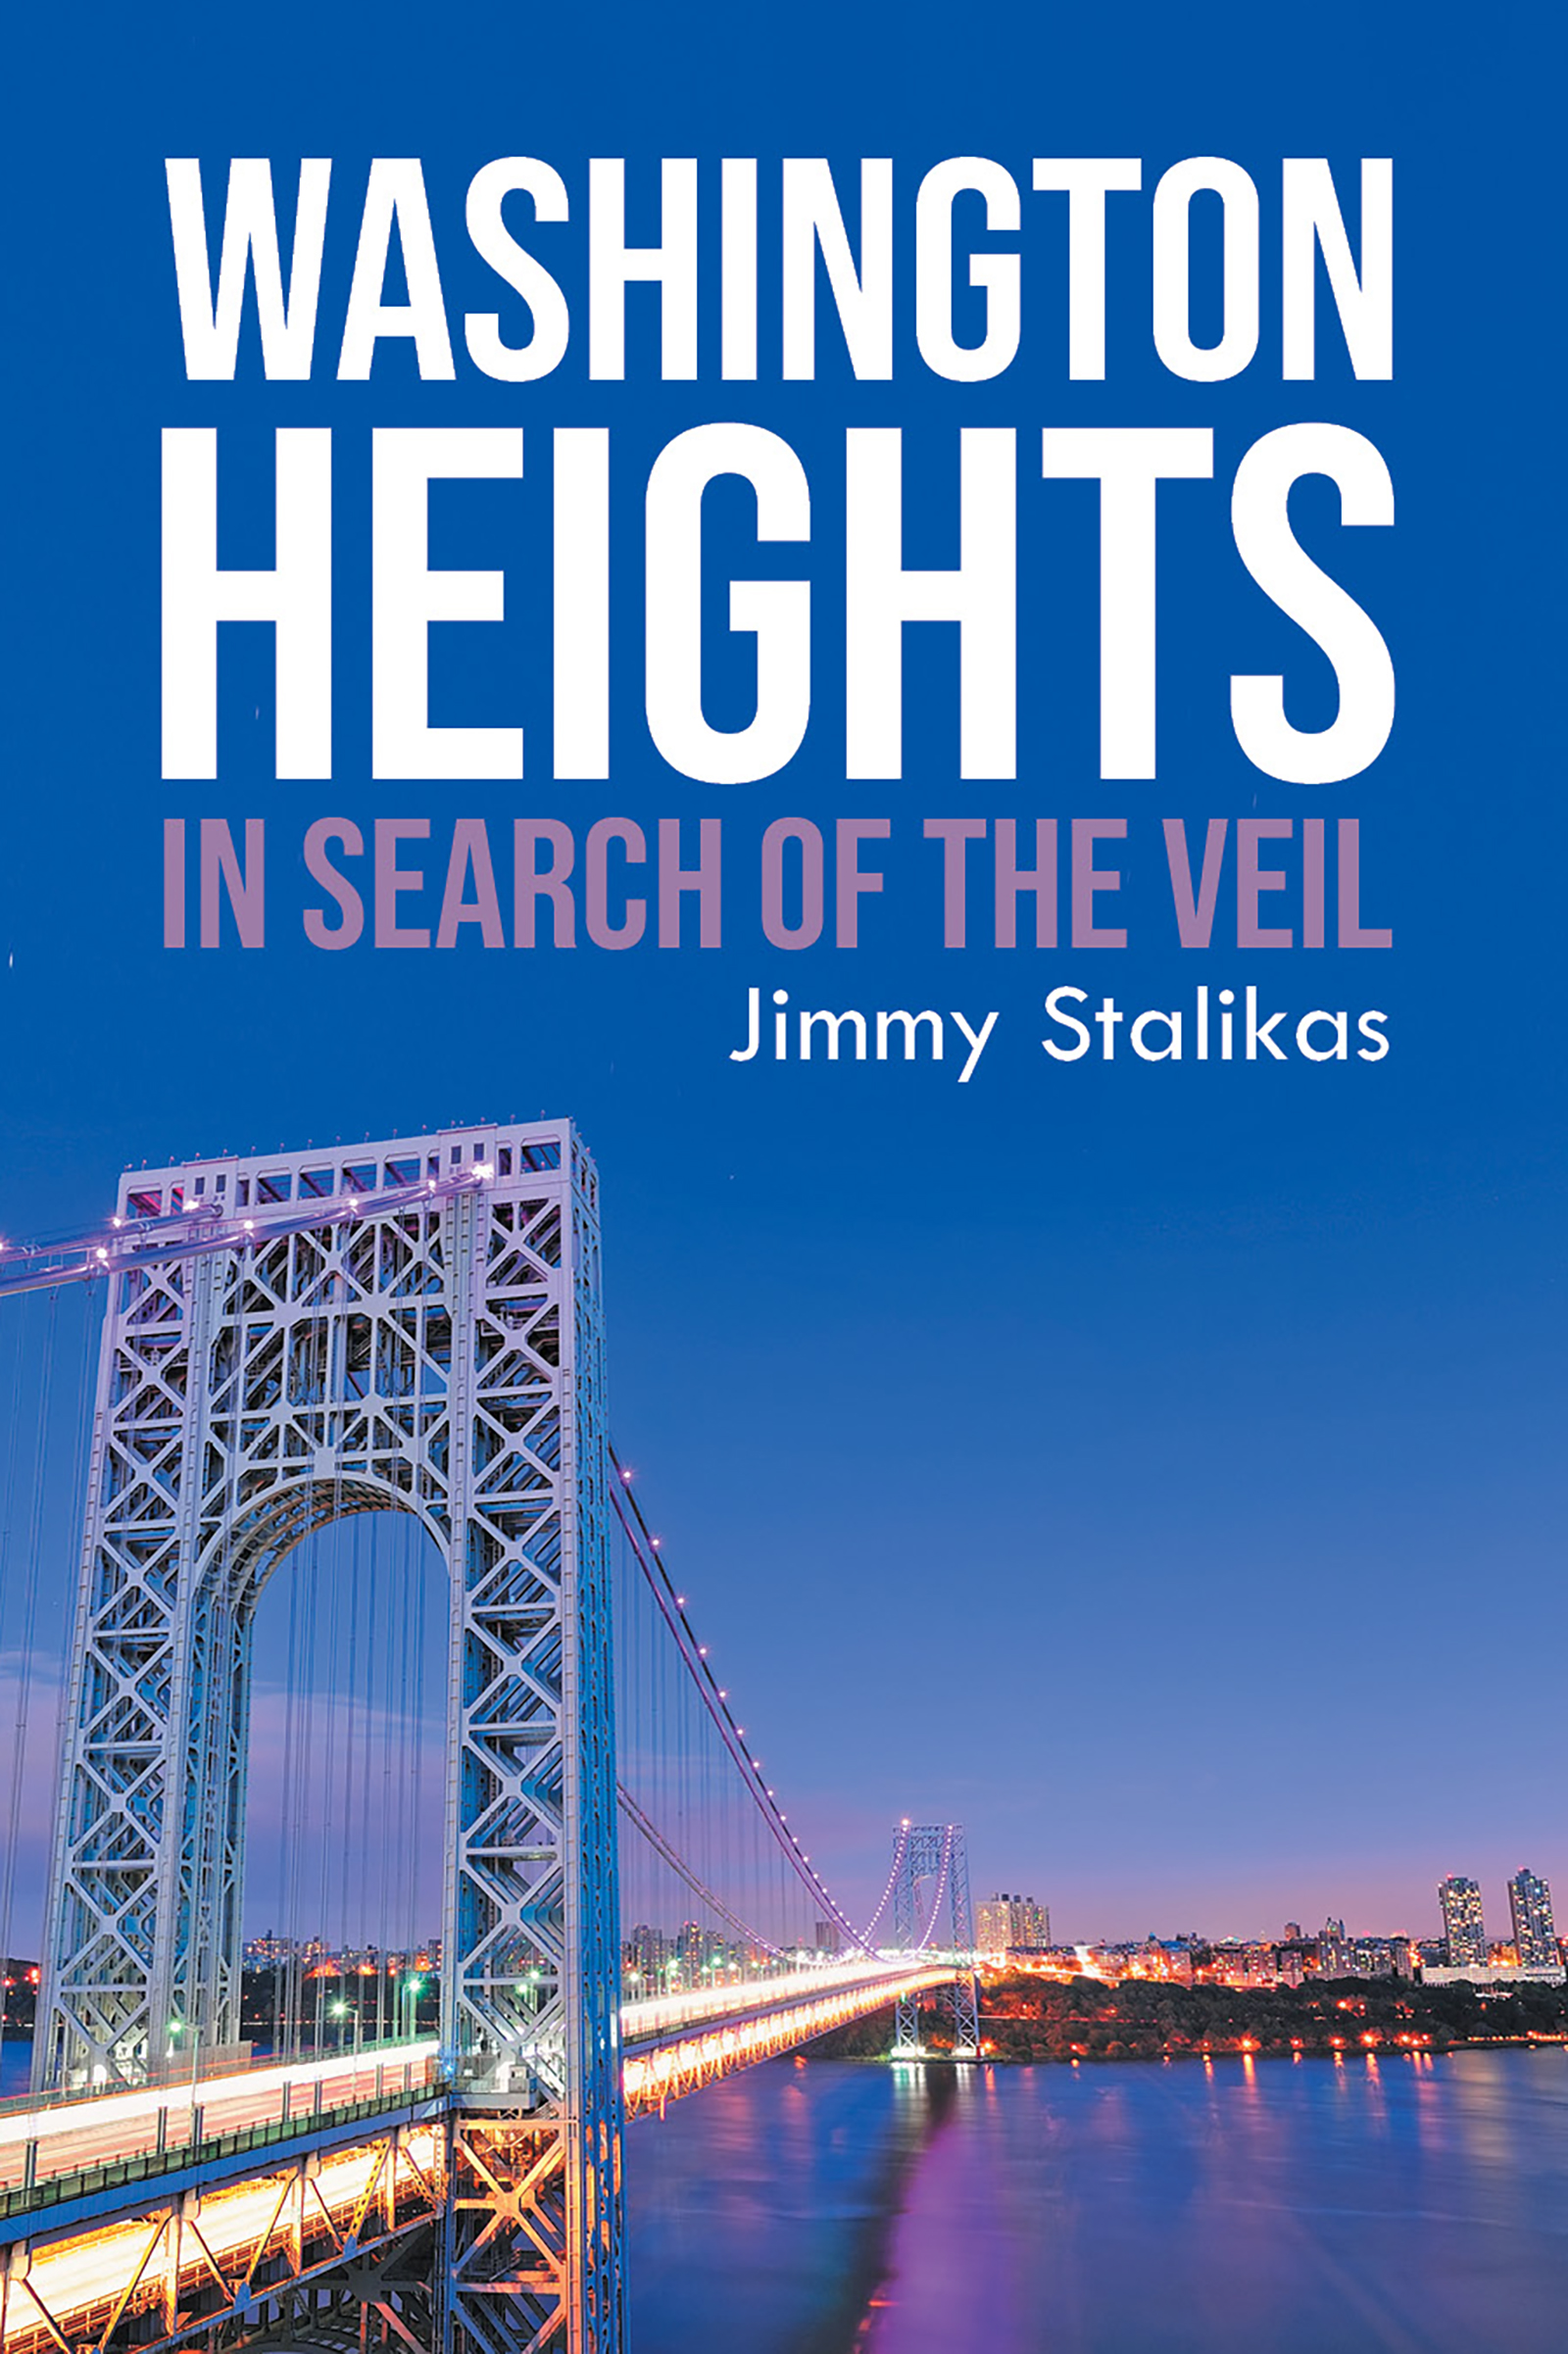 Washington Heights: In Search of the Evil by Jimmy Stalikas